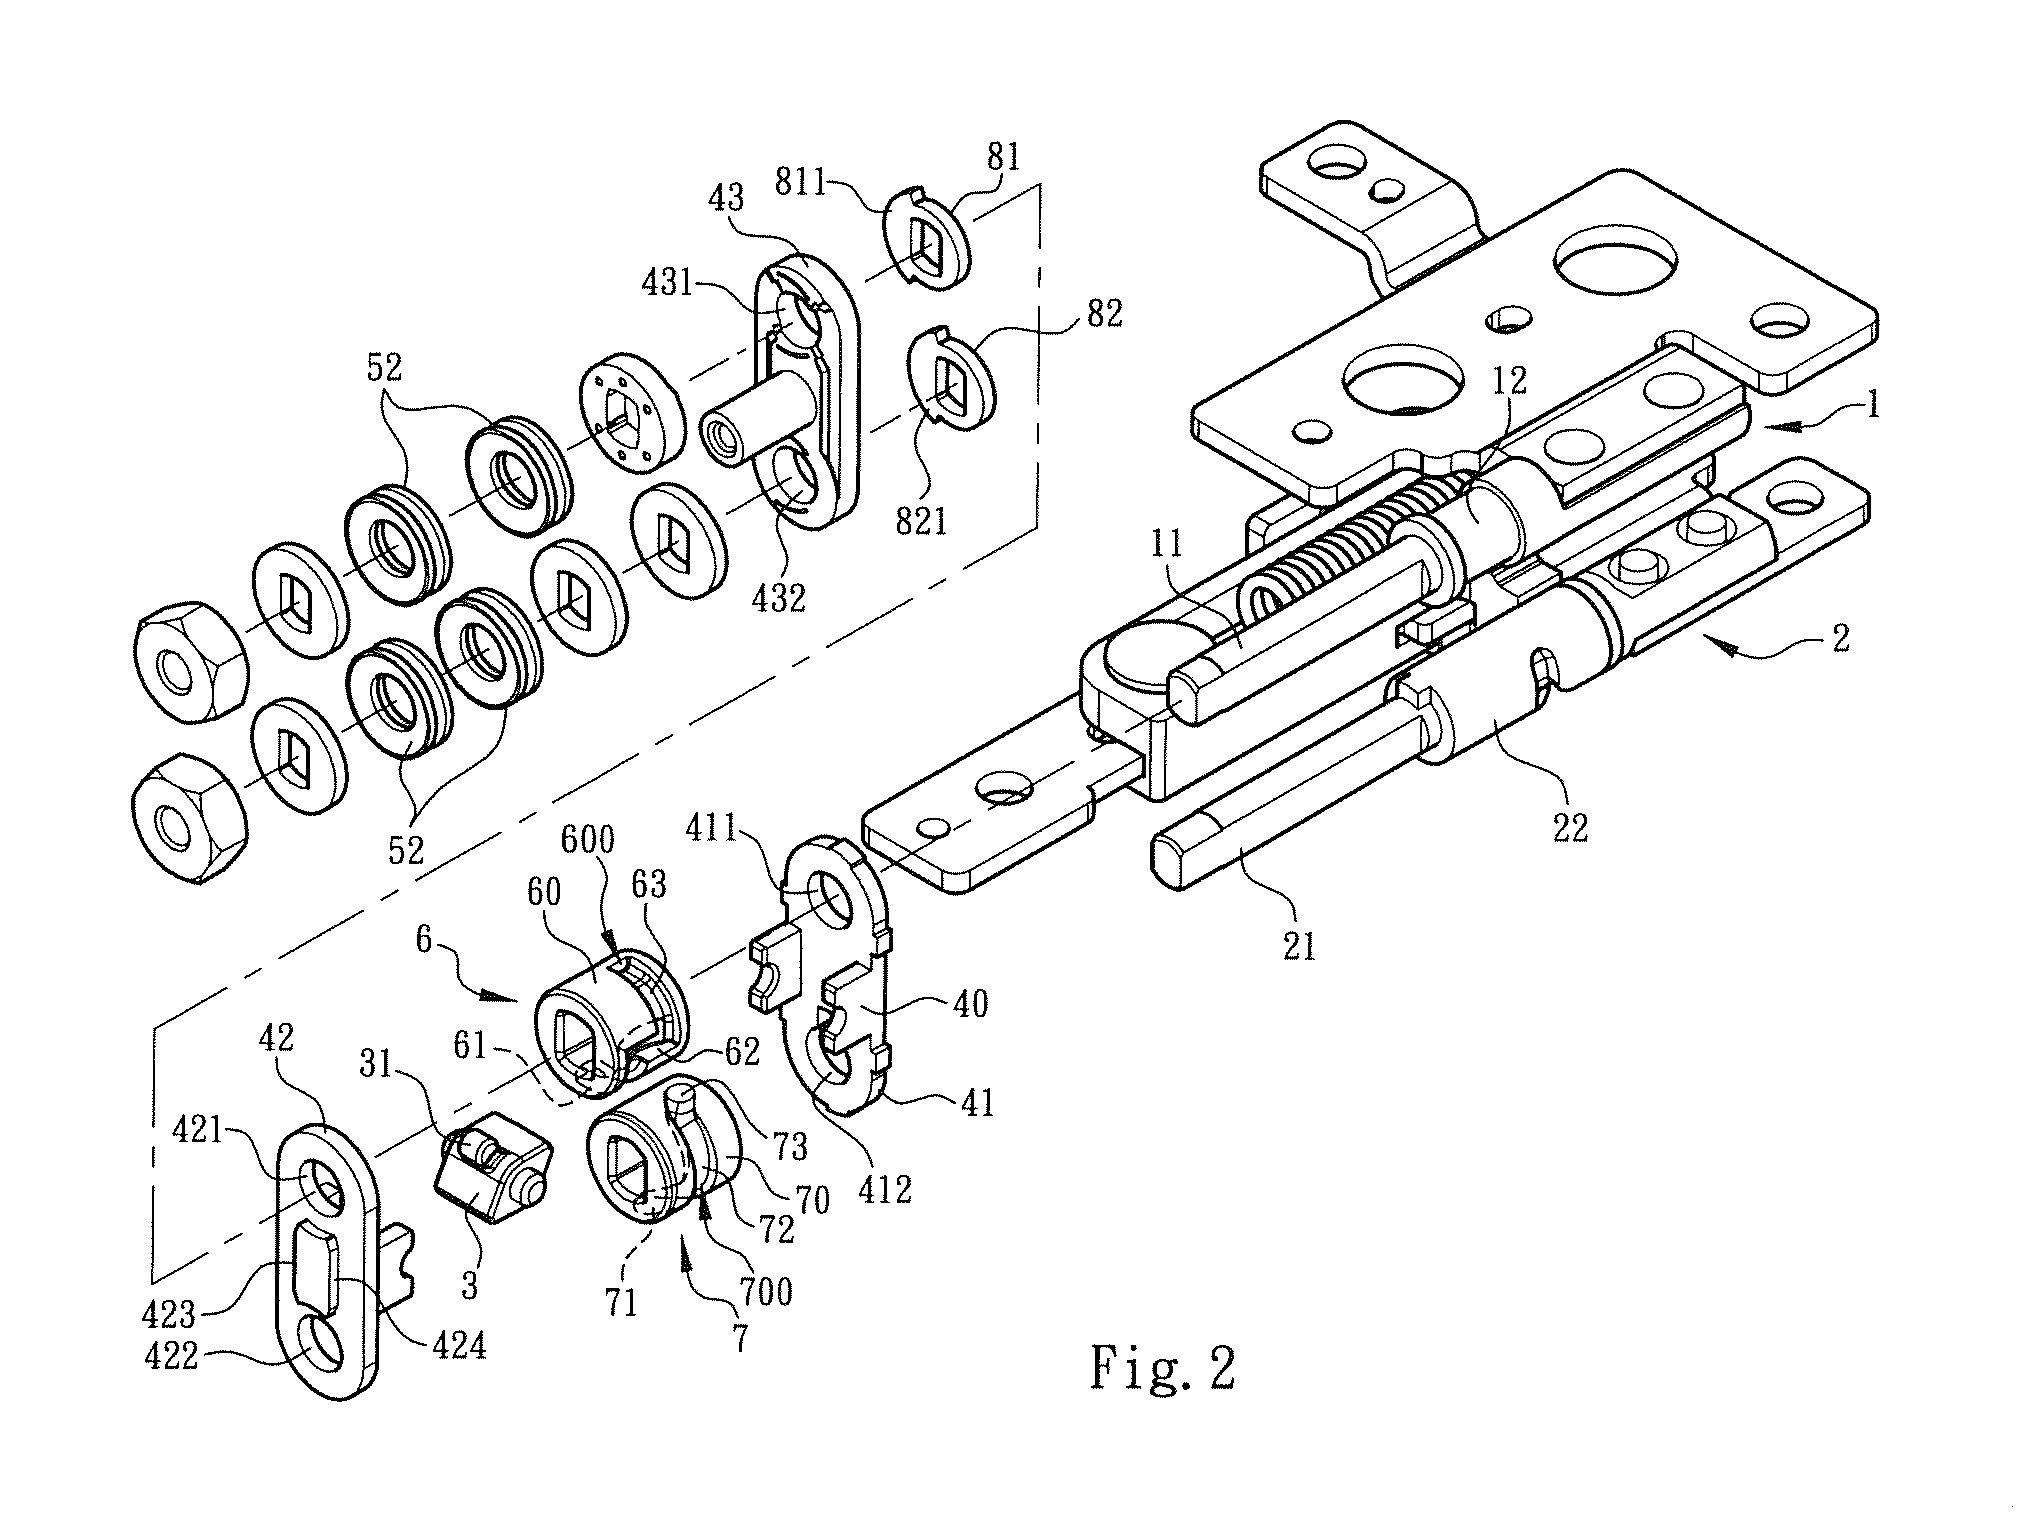 Convertible axle structure